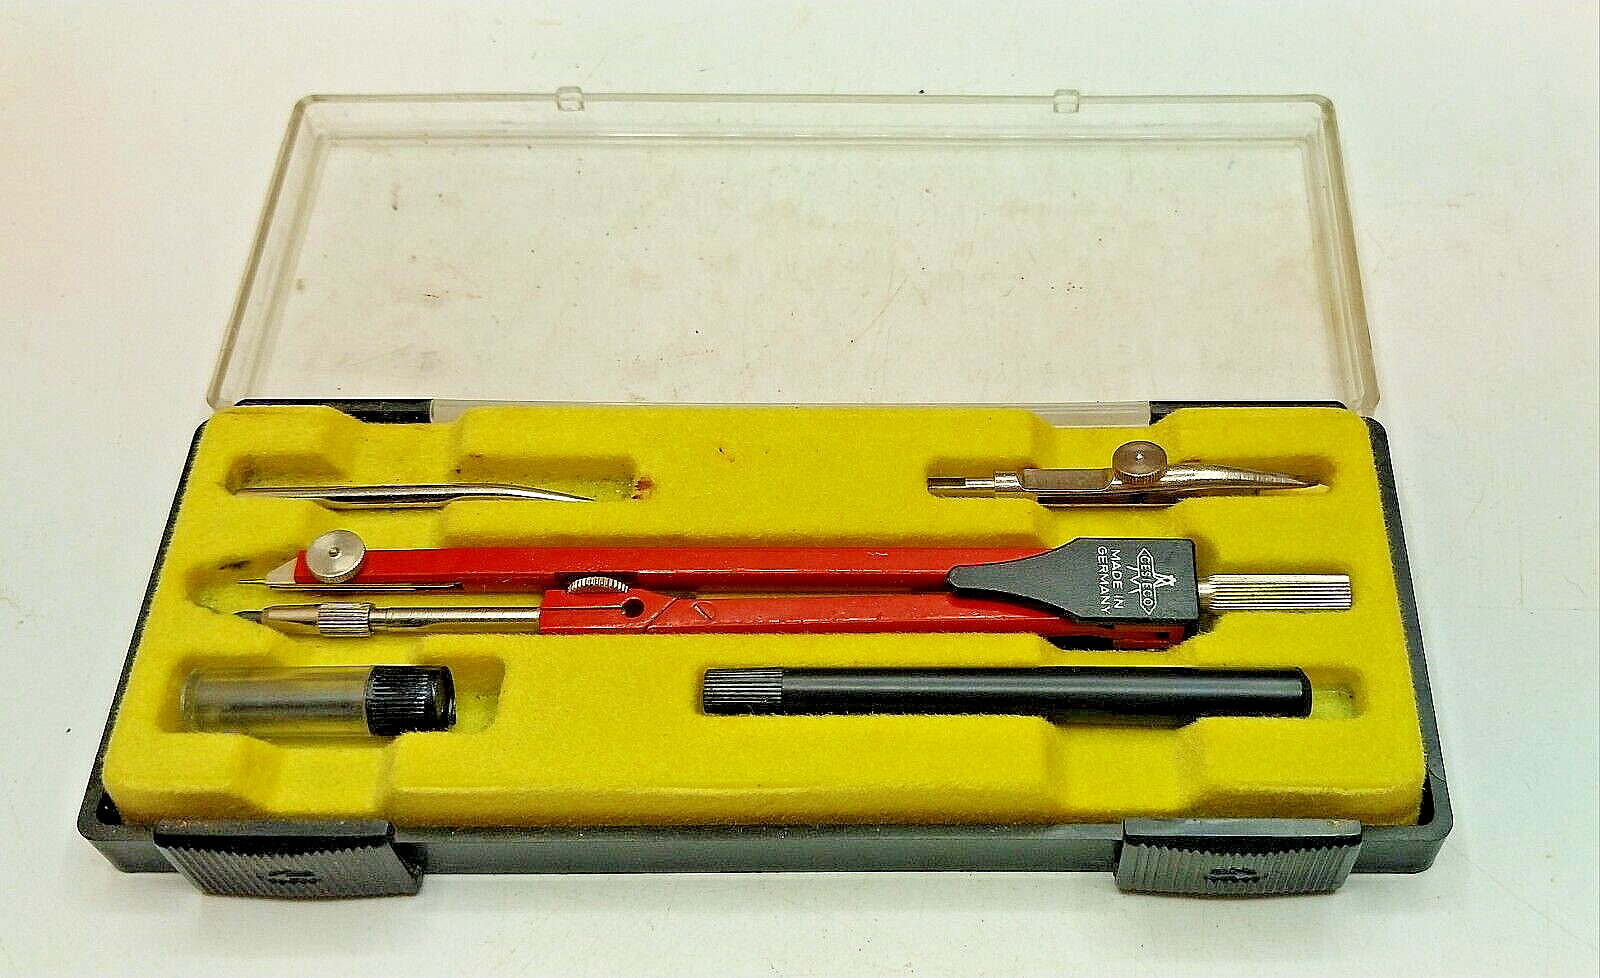 Vintage Cesieco German Made Small Red Drafting Tools with Slide Lock Case